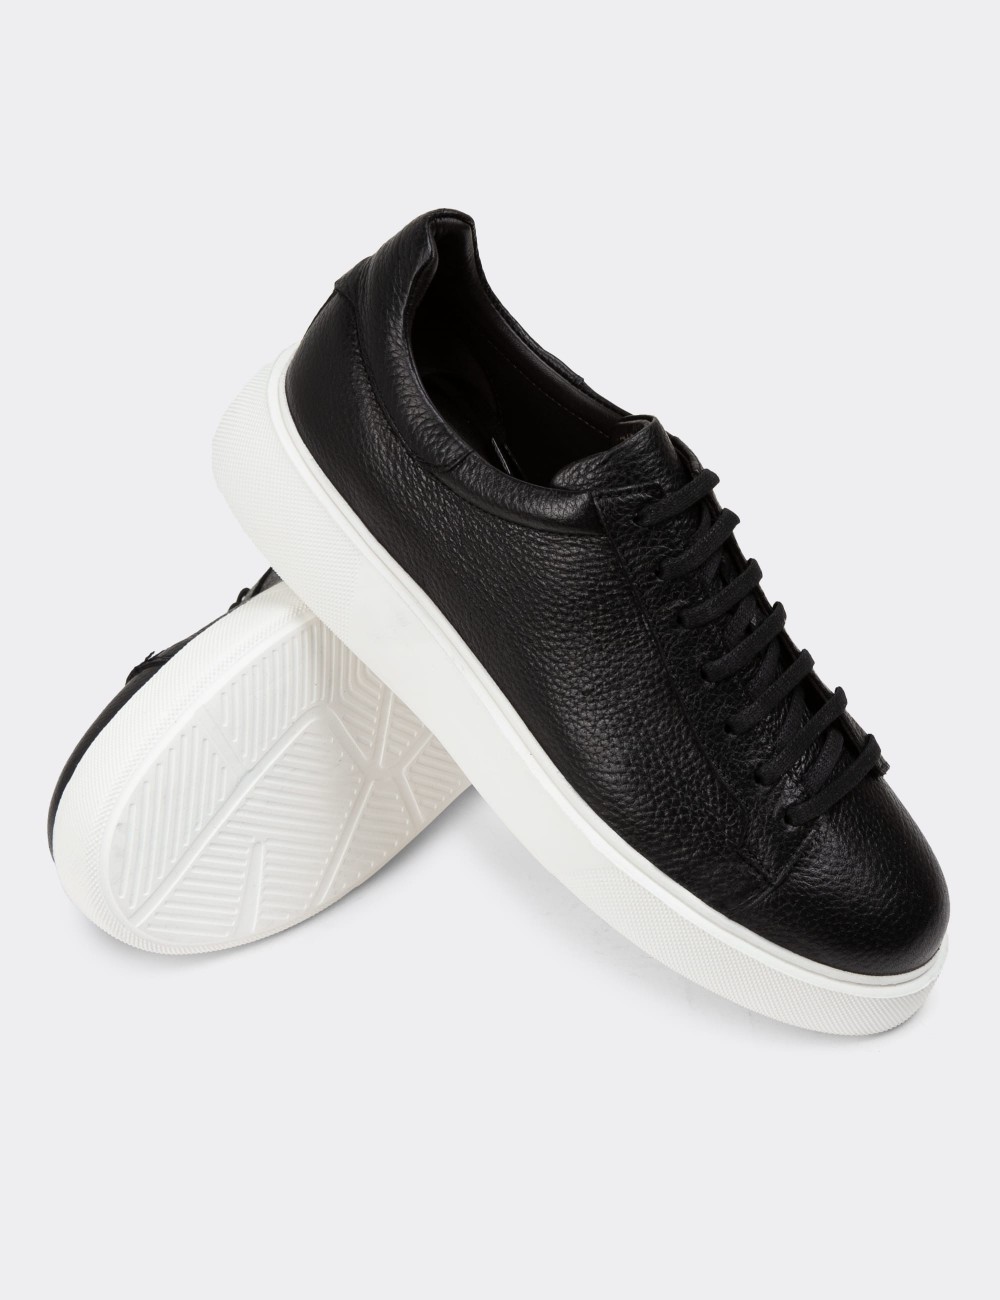 Black Leather Sneakers - 01954MSYHE02